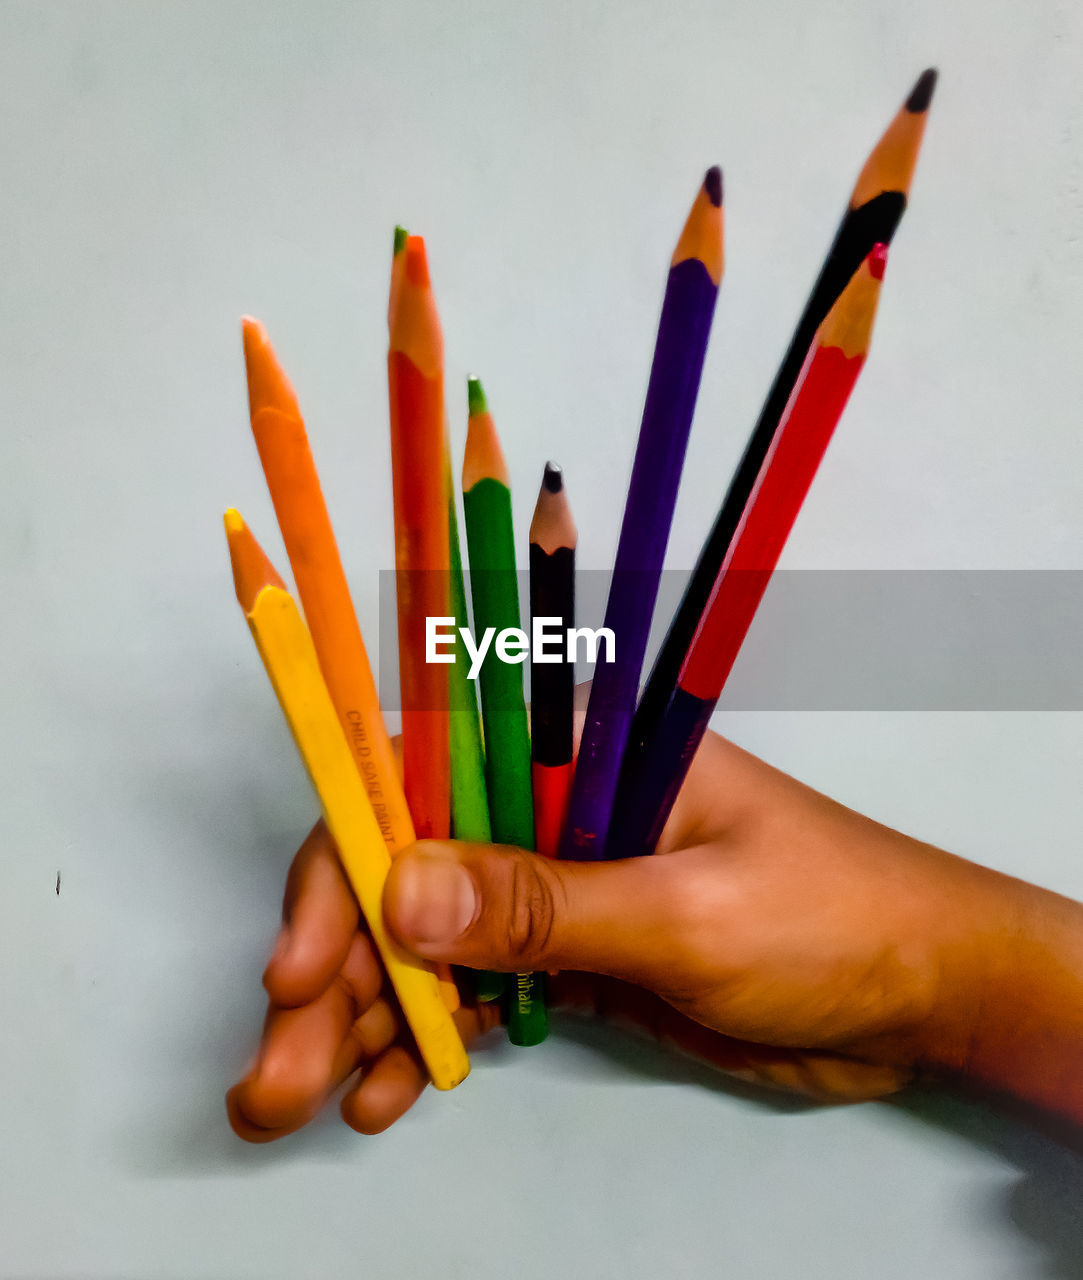 Close-up of hand holding colored pencils against white background